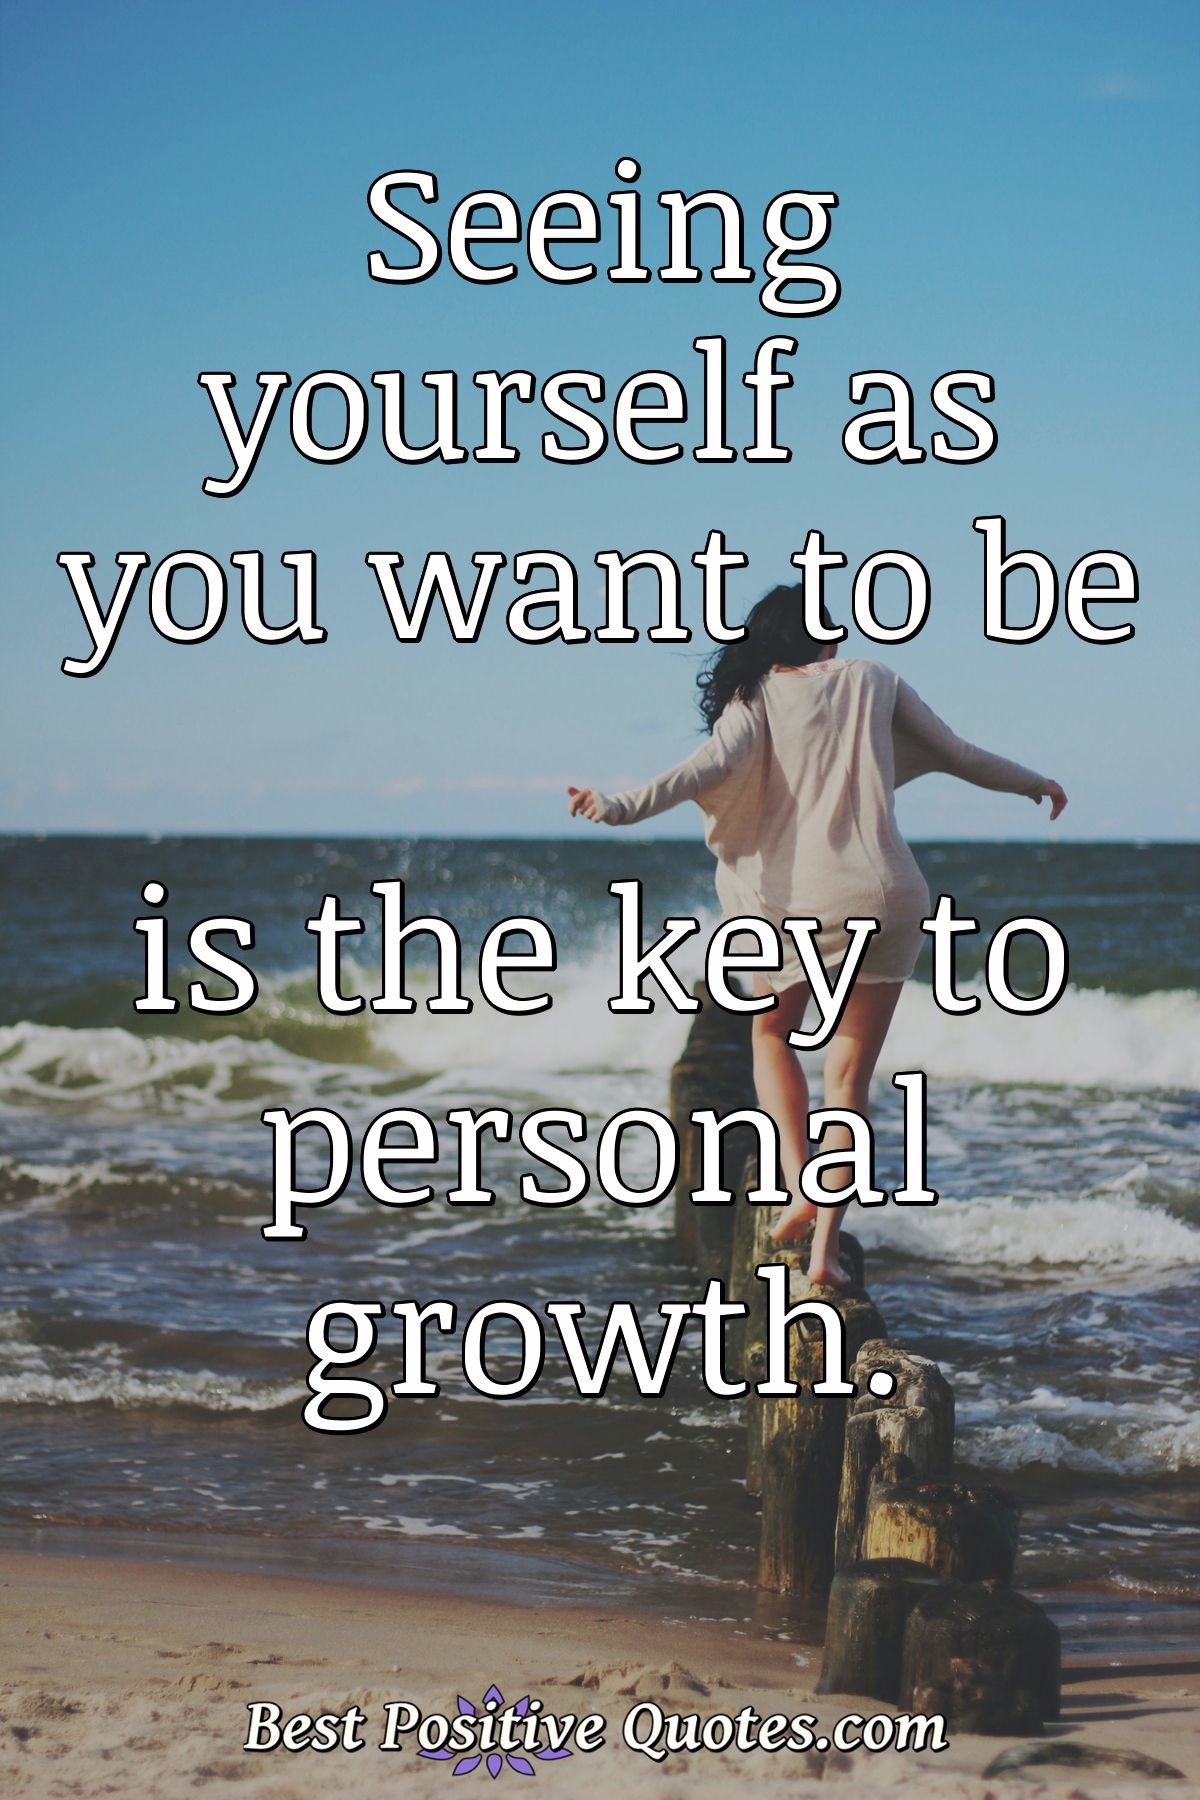 Seeing yourself as you want to be is the key to personal growth. - Anonymous